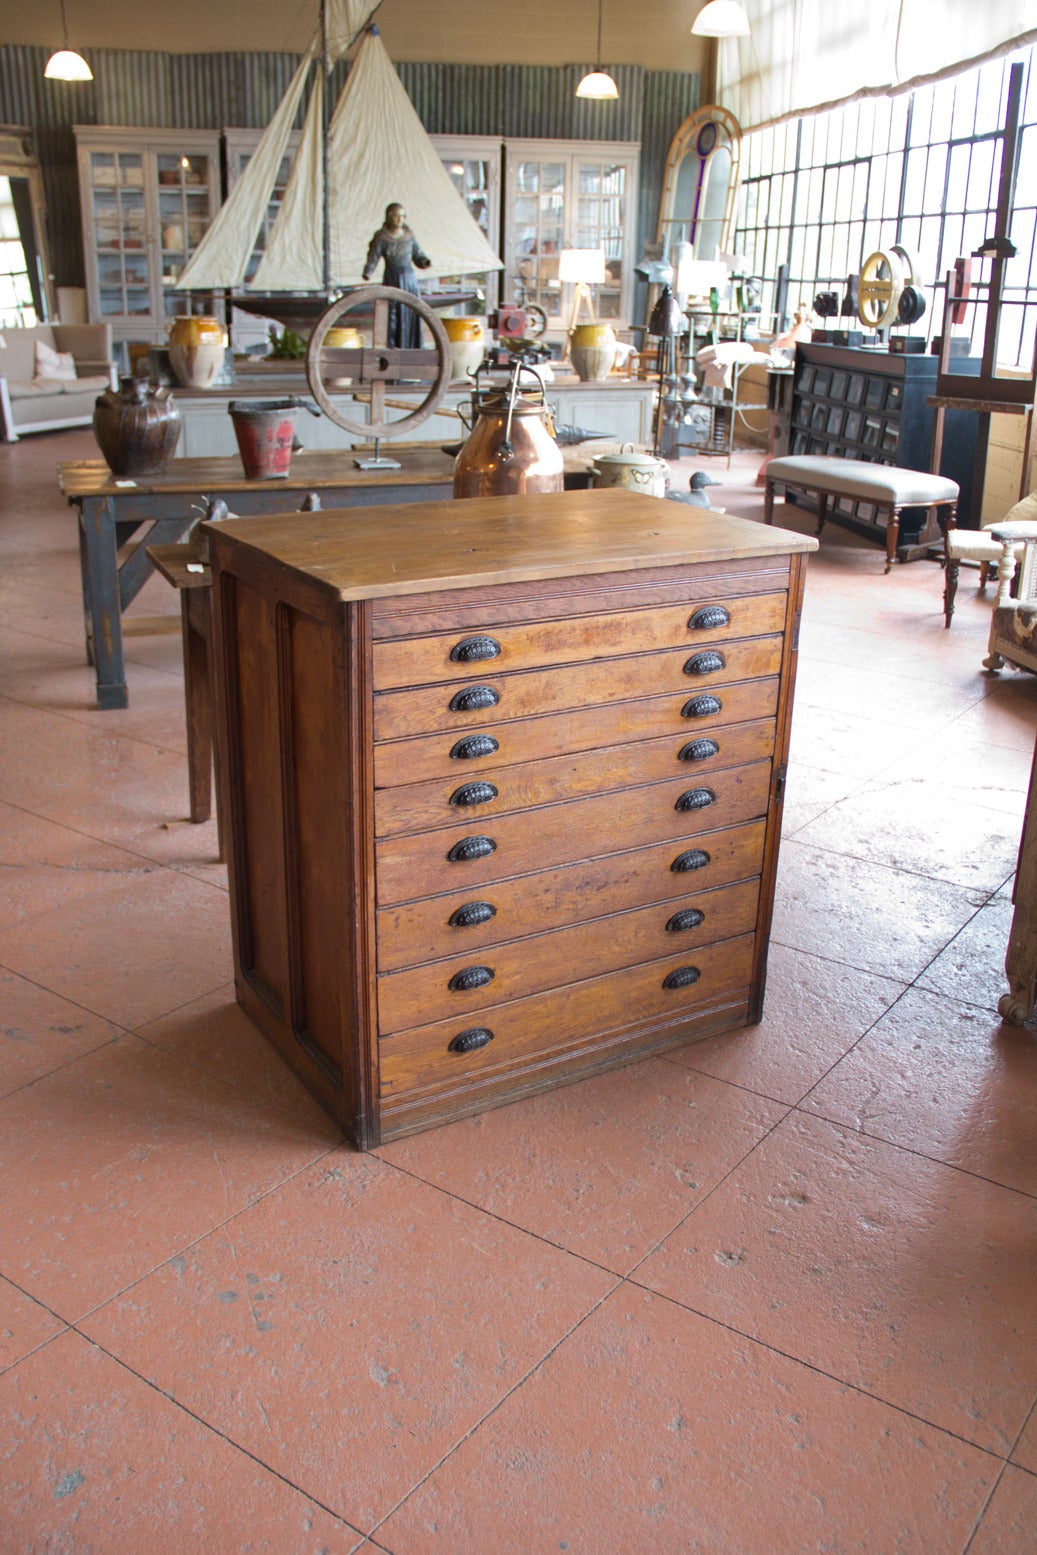 Antique English oak eight-drawer fielded paneled planner's chest with original Gaslon pulls. The top is pine.